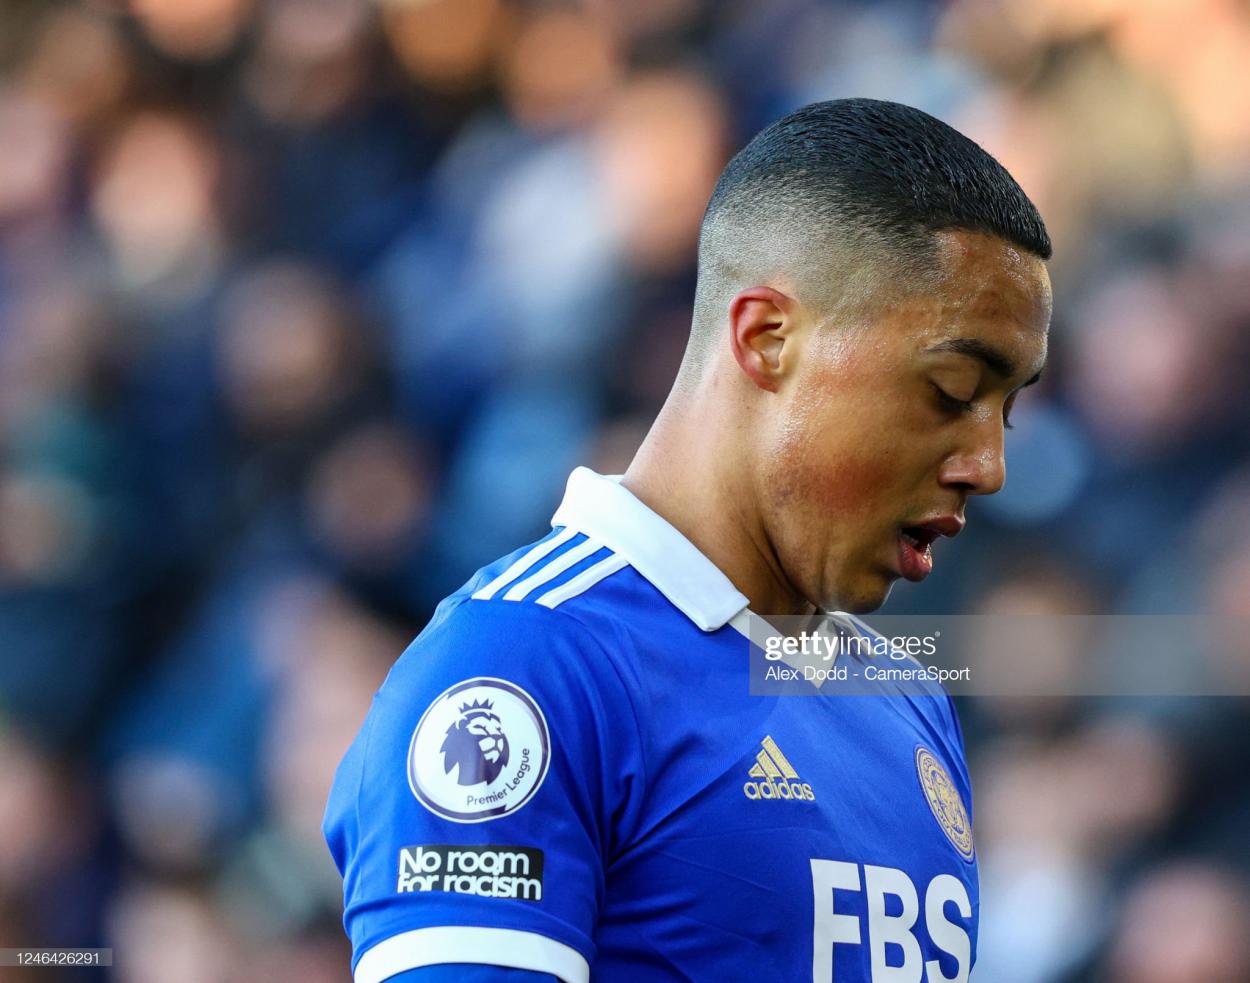 LEICESTER, ENGLAND - JANUARY 21: Leicester City's Youri Tielemans in action during the Premier League match between Leicester City and Brighton & Hove Albion at The King Power Stadium on January 21, 2023 in Leicester, United Kingdom. (Photo by Alex Dodd - CameraSport via Getty Images)